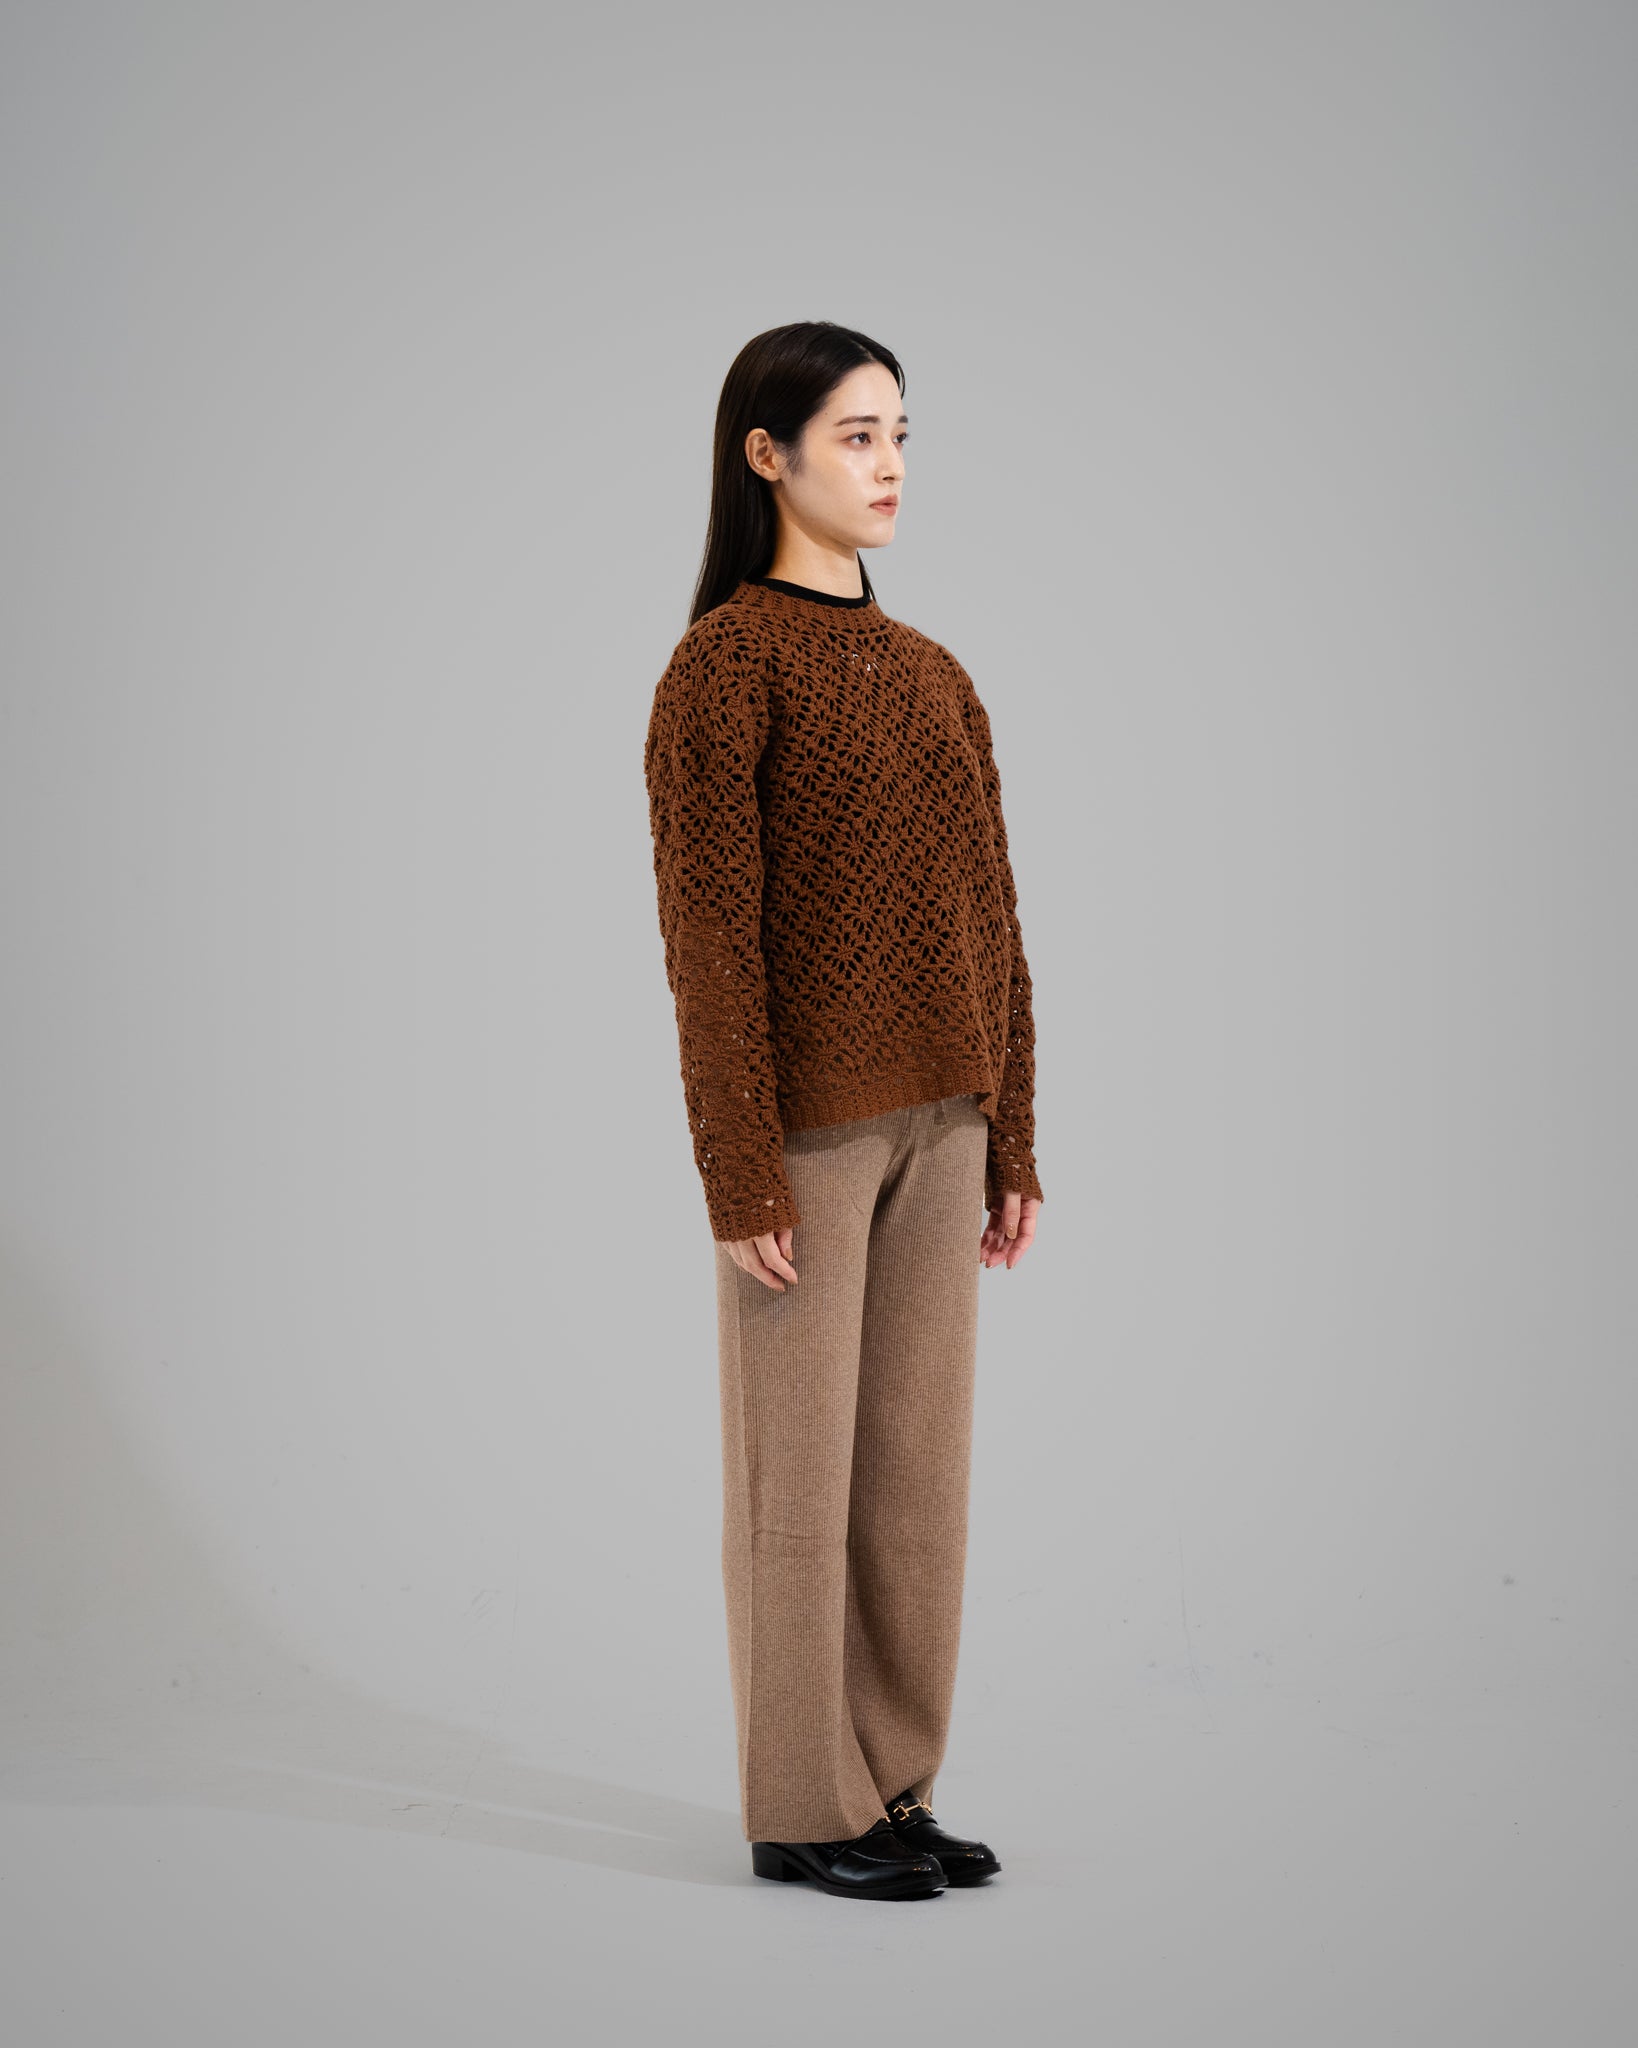 Crochet Hand Knit Pullover Sweater -Brown